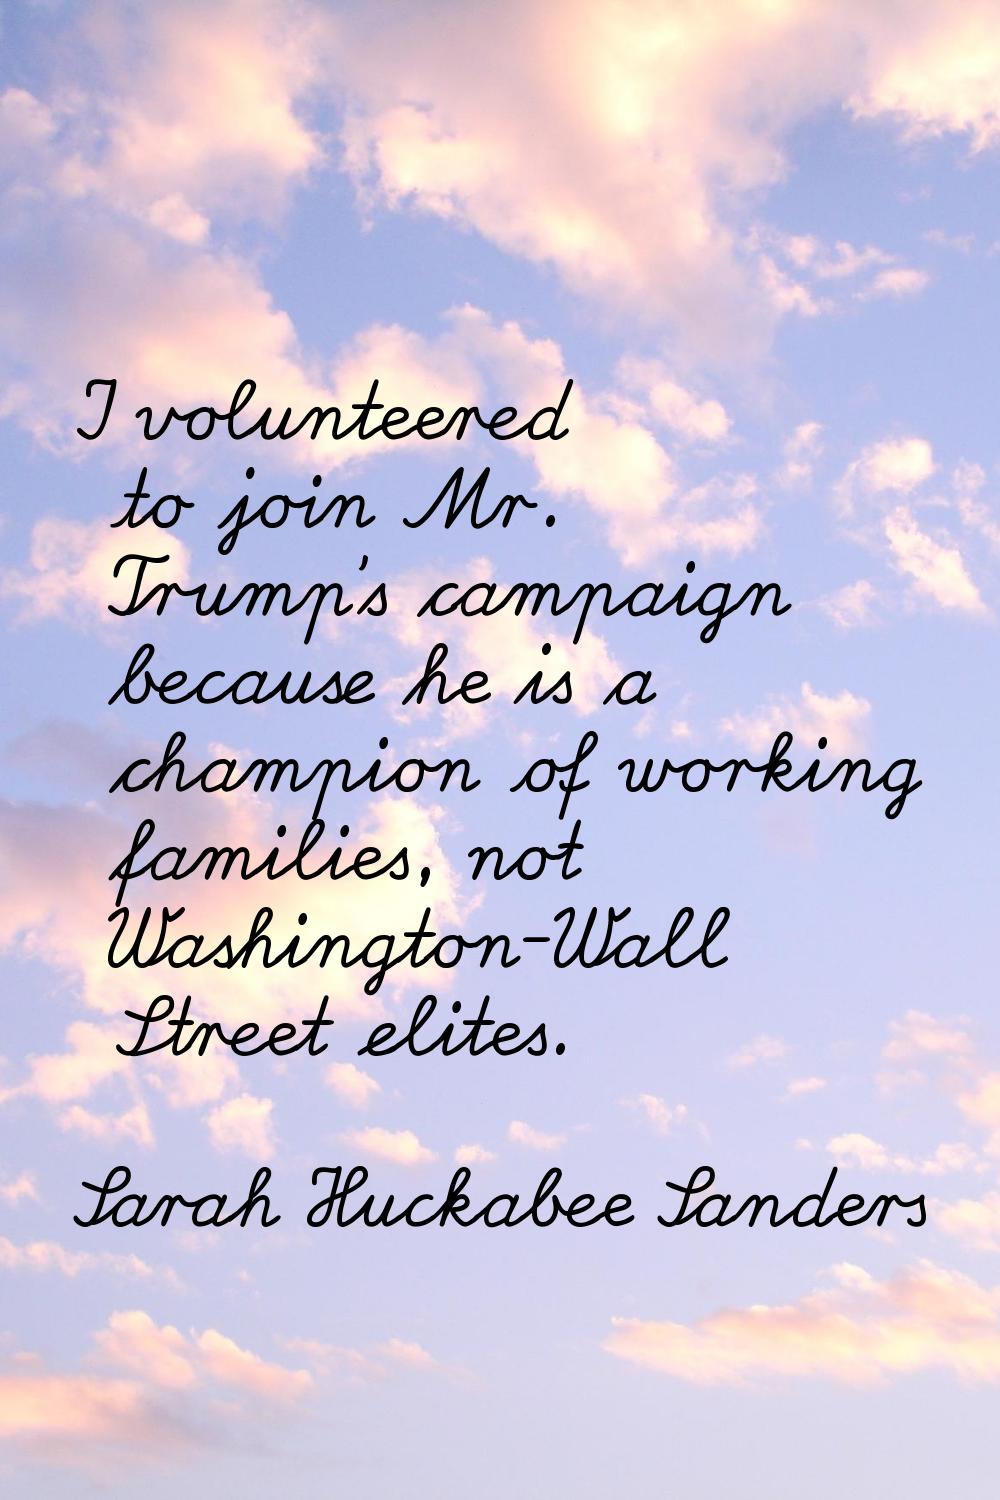 I volunteered to join Mr. Trump's campaign because he is a champion of working families, not Washin